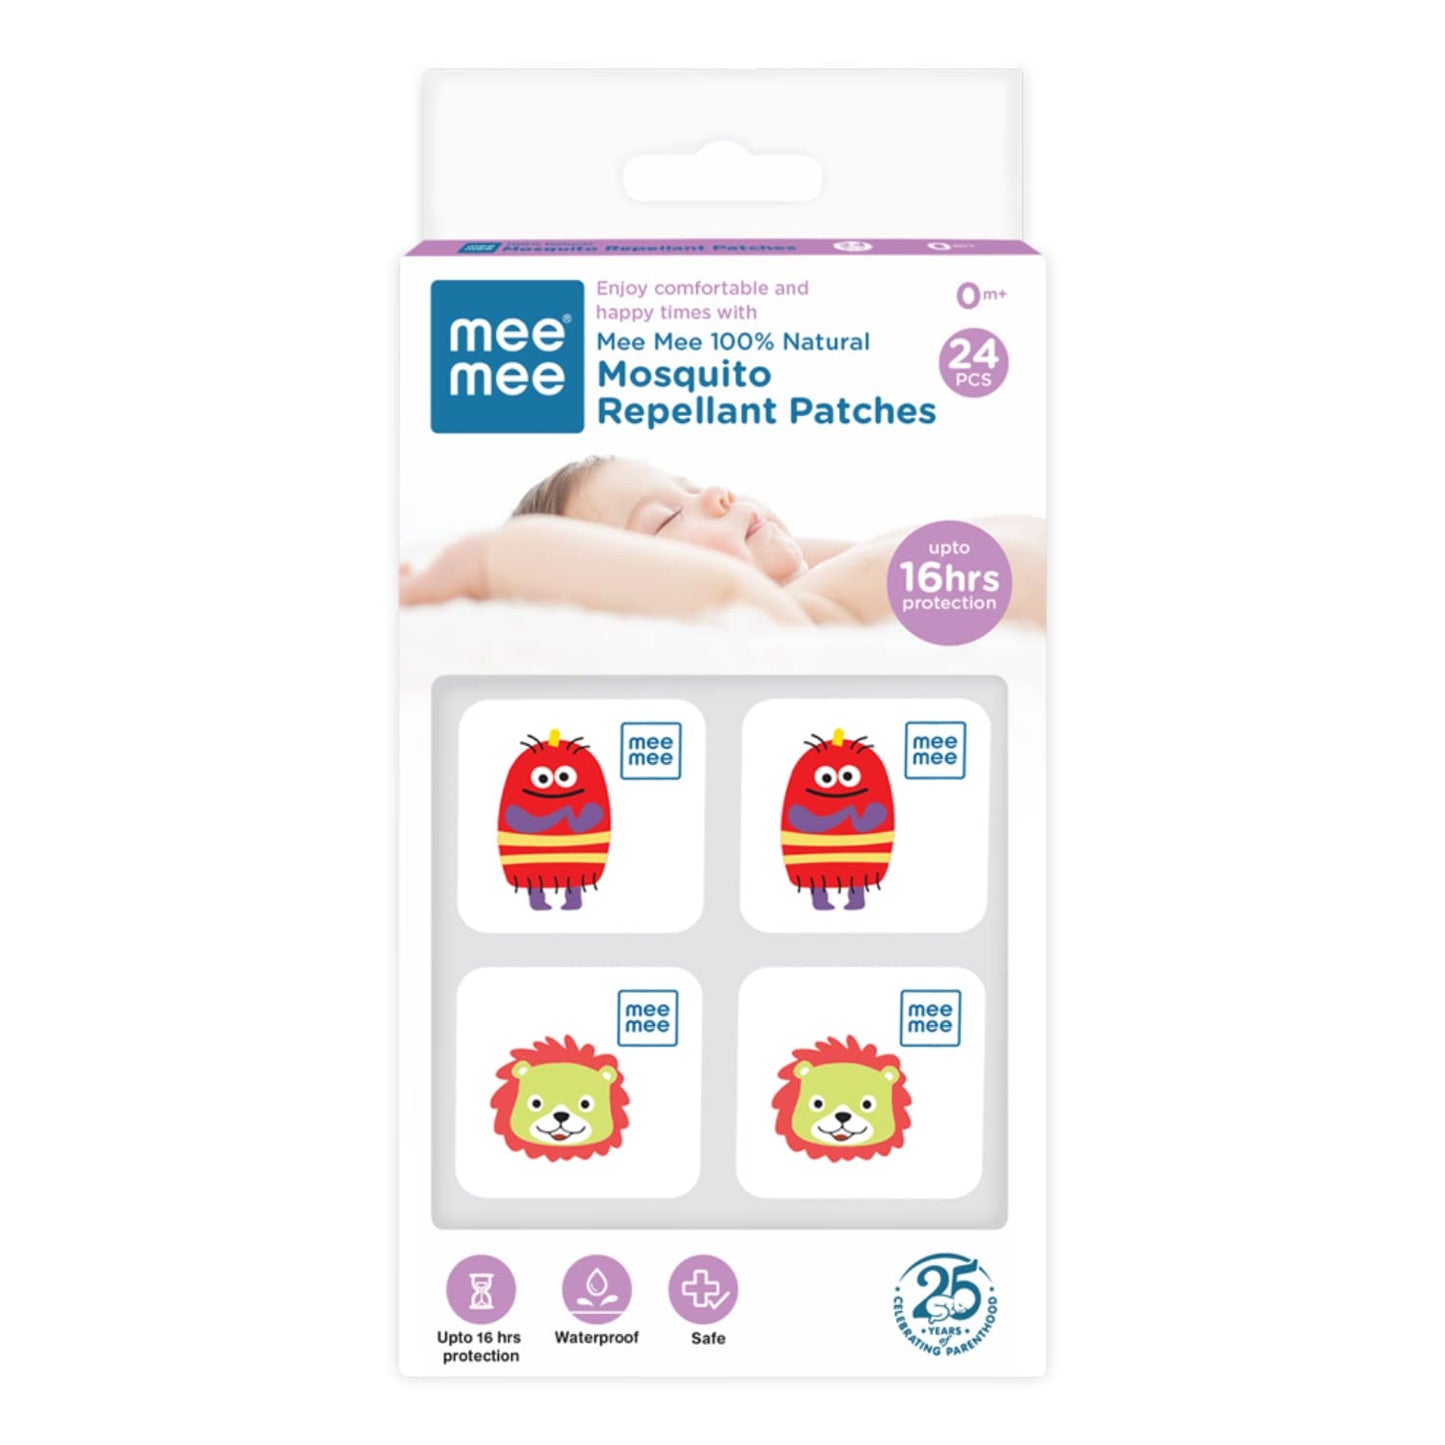 Mee Mee 100% Natural Mosquito Waterproof Repellant Patches, upto 16 Hour Protection for 0+ Baby and Kids - 24 pcs